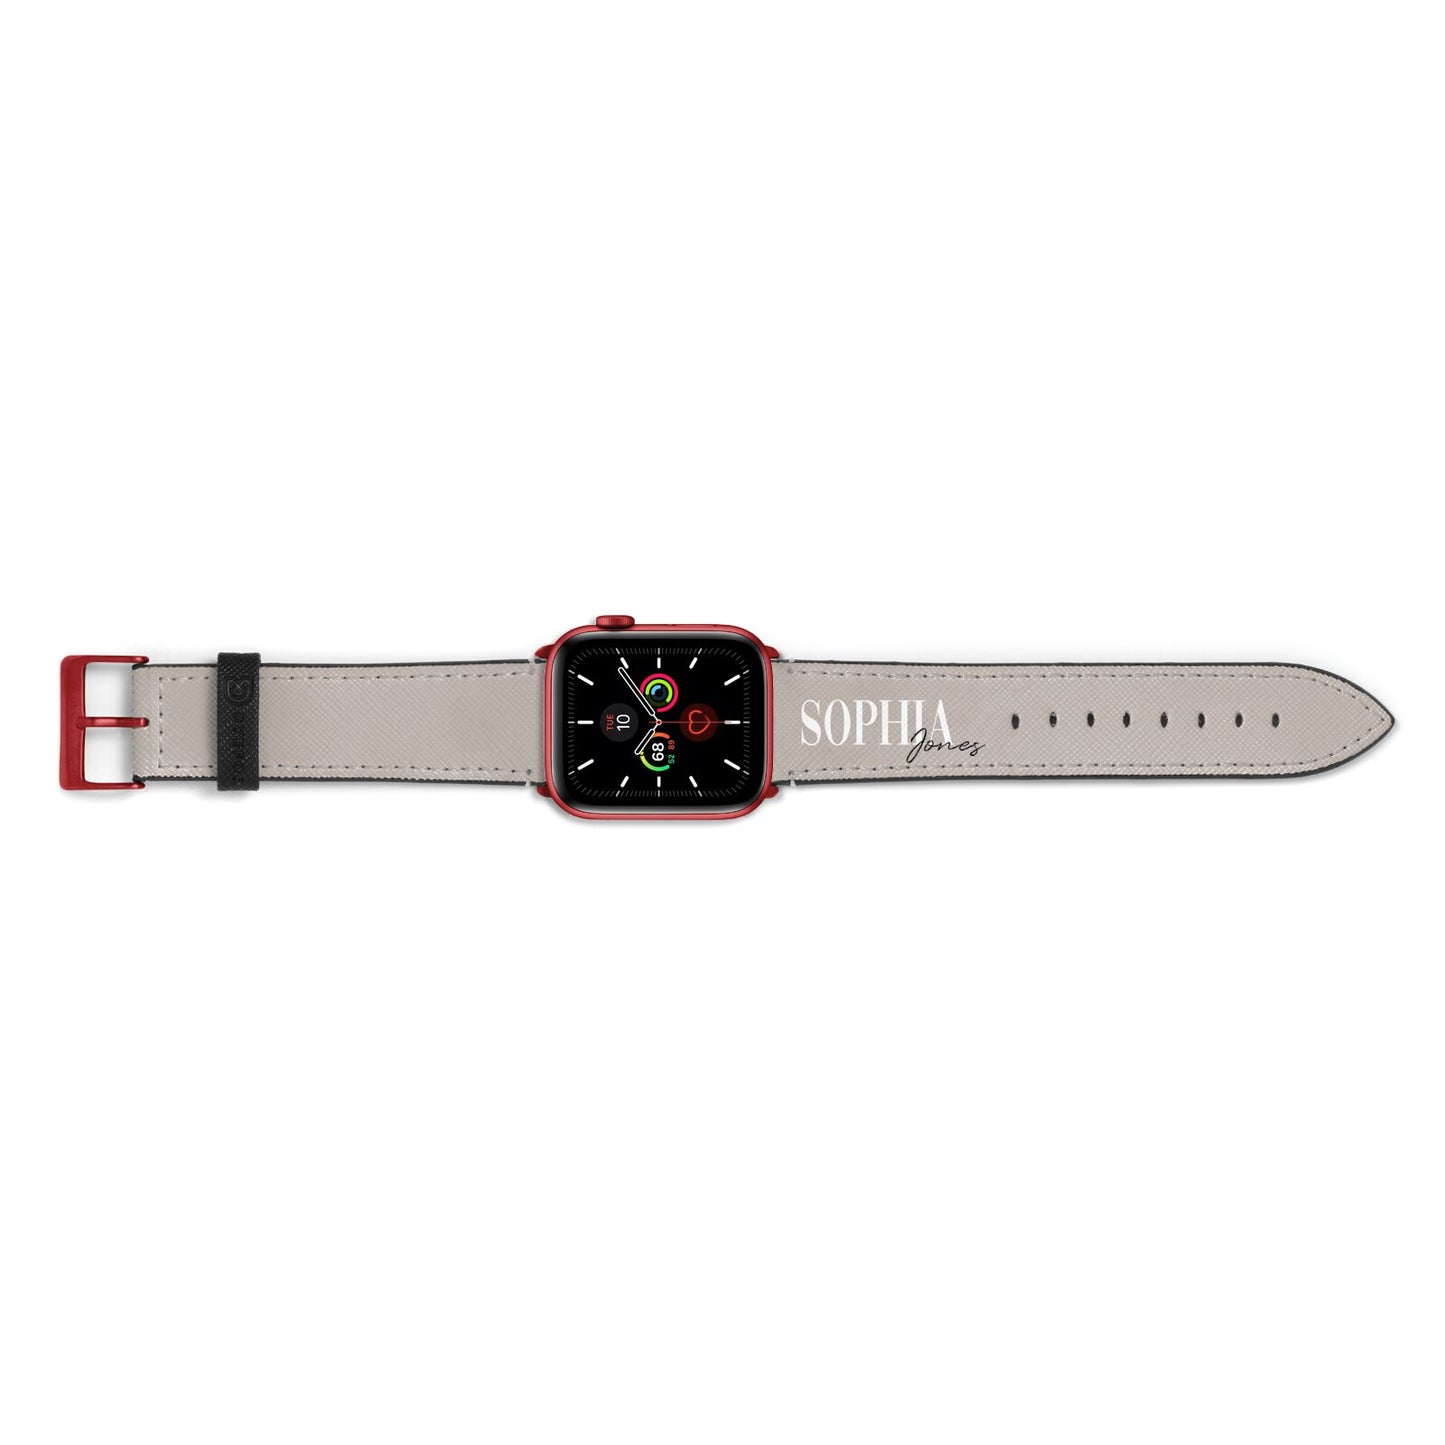 Stone Colour with Personalised Name Apple Watch Strap Landscape Image Red Hardware